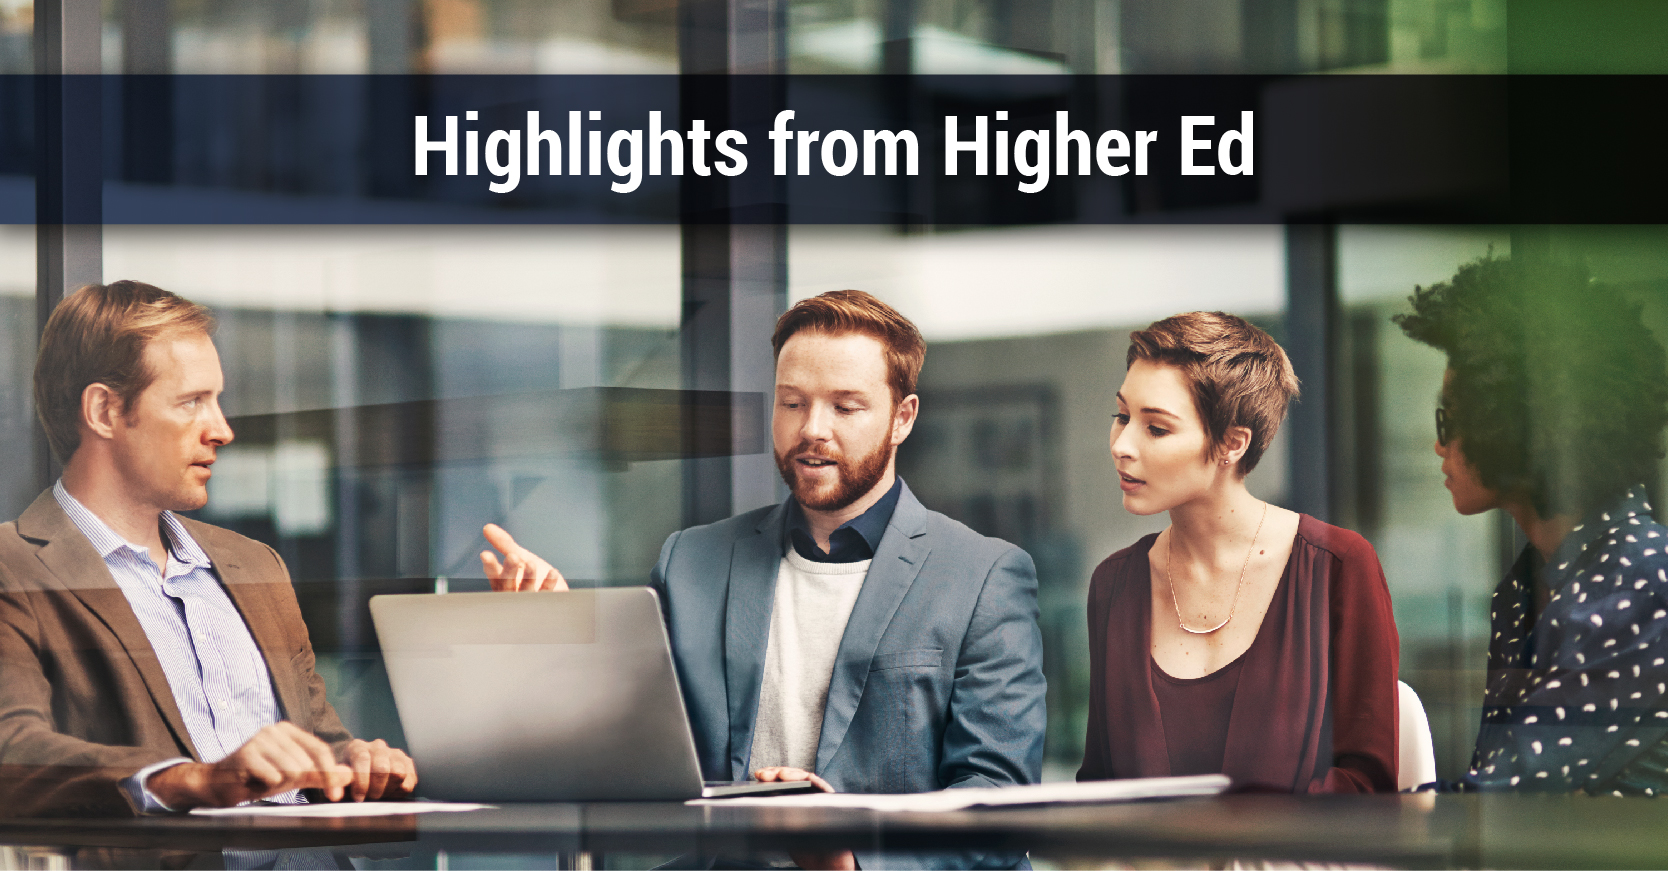 Highlights from Higher Ed: Public Health Popularity, Microcredentials, Higher-Ed Risks, and Early Decisions